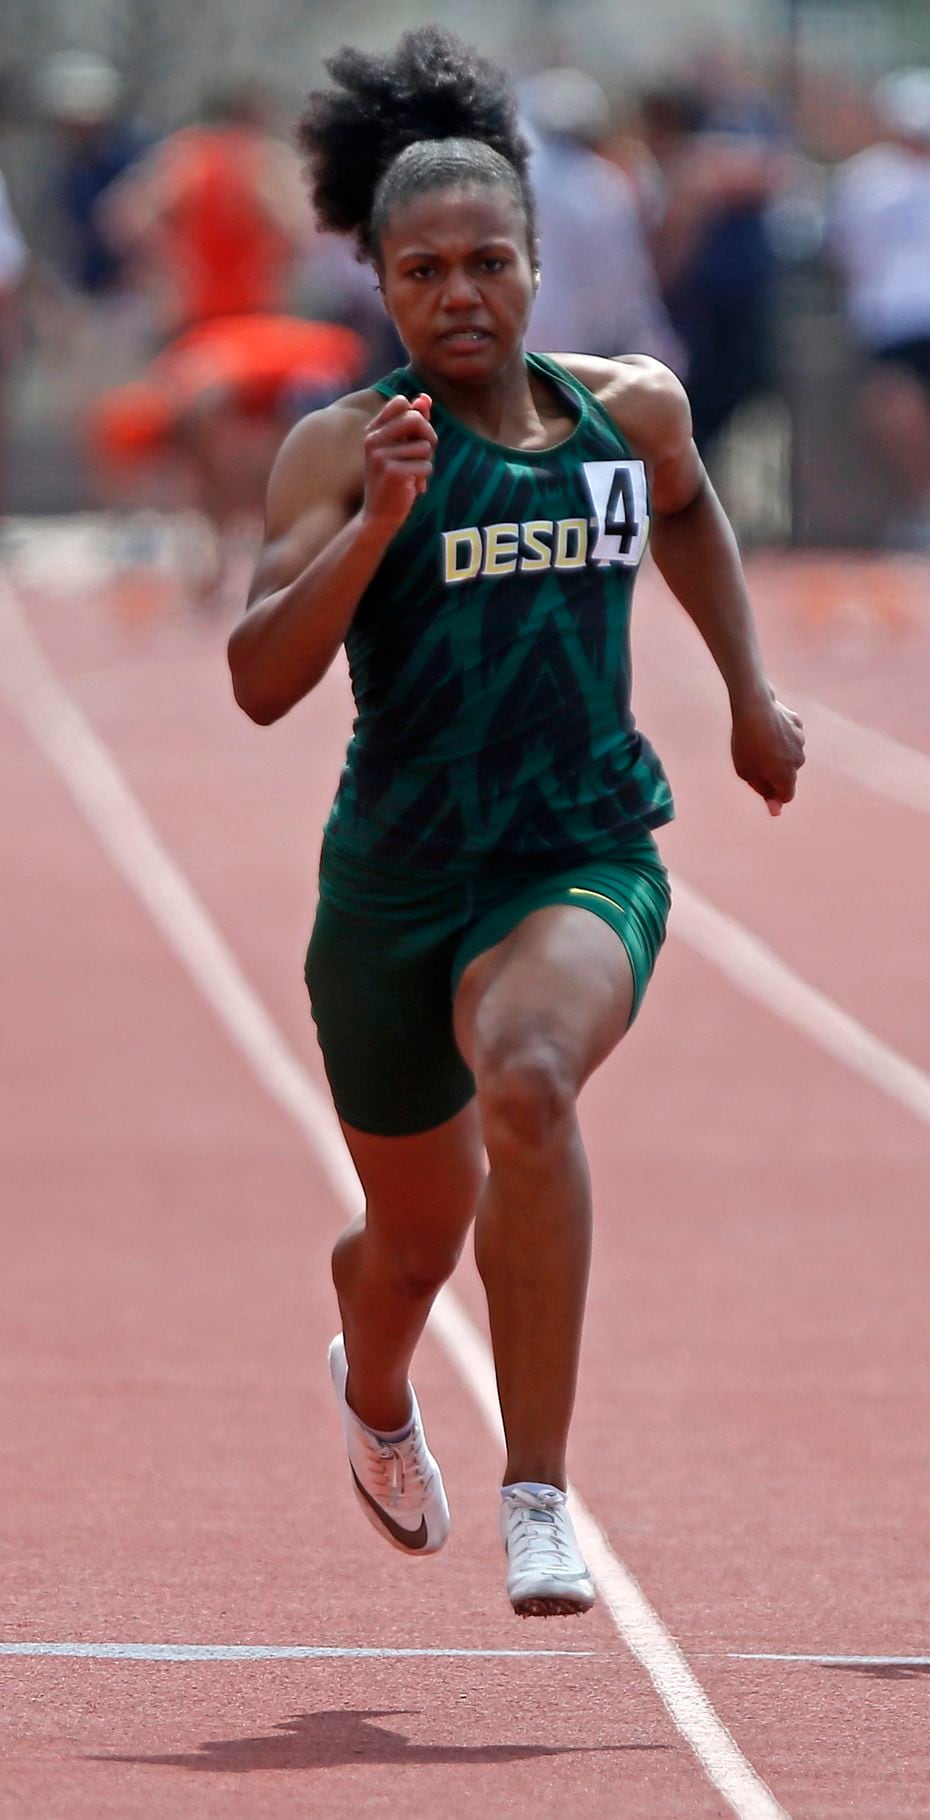 Jaera Griffin  18, of DeSotto High School, had the best time in the girls 100 meters during...